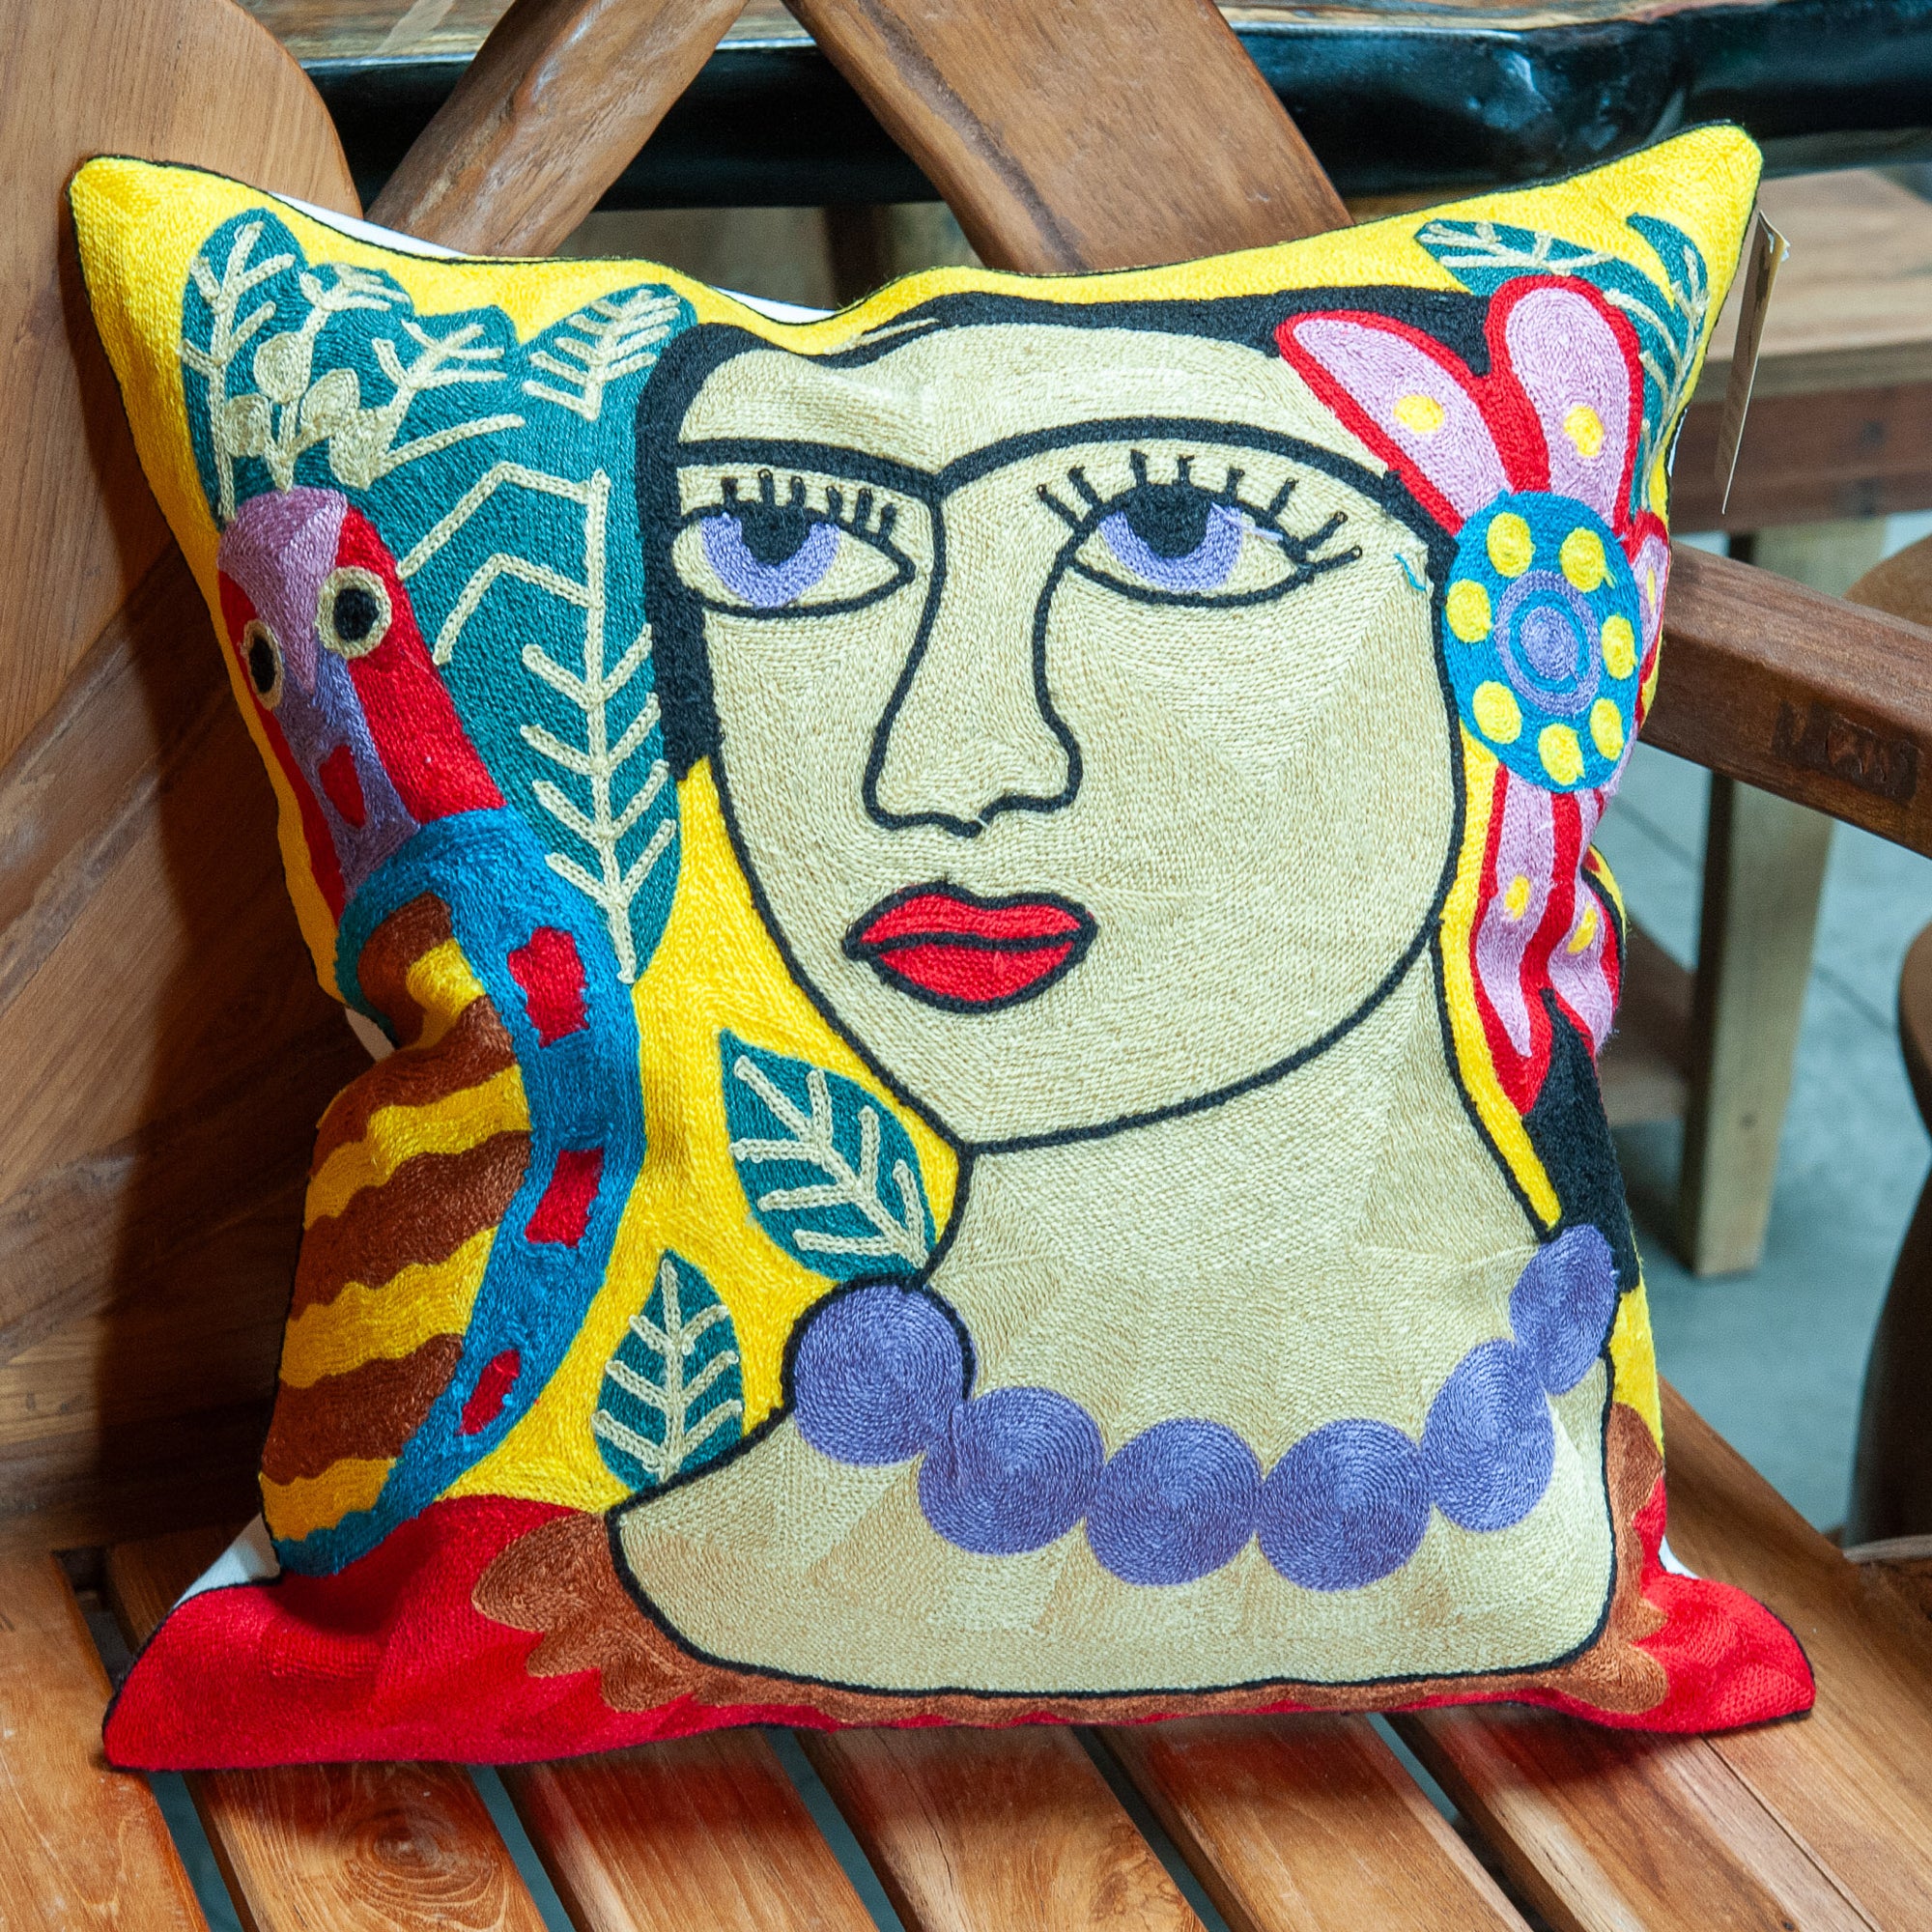 Embroidered Pillow Cover - Frida Kahlo